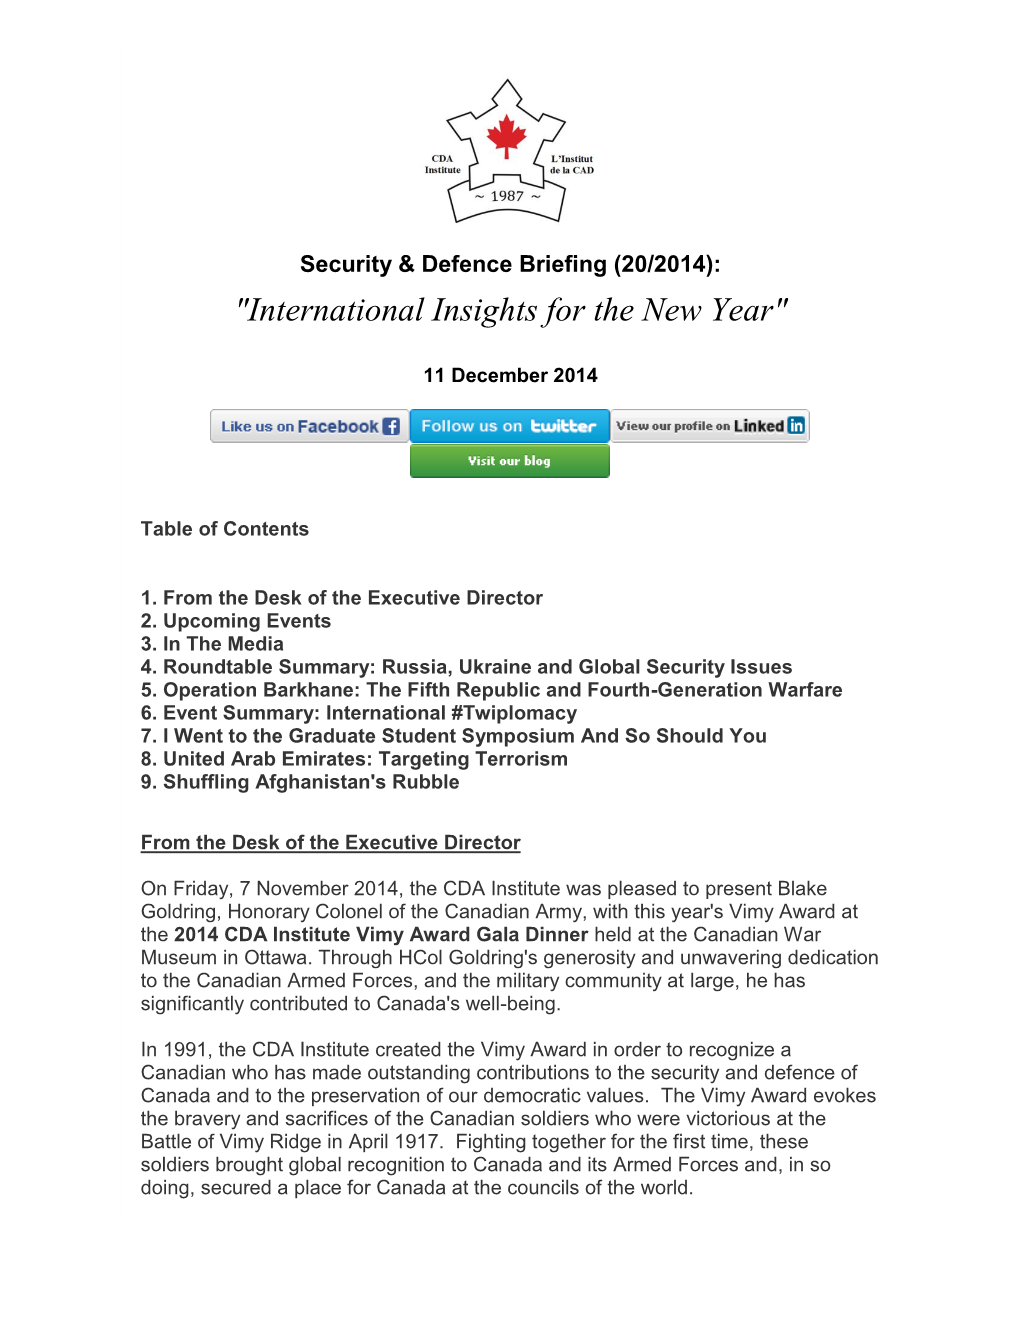 "International Insights for the New Year"